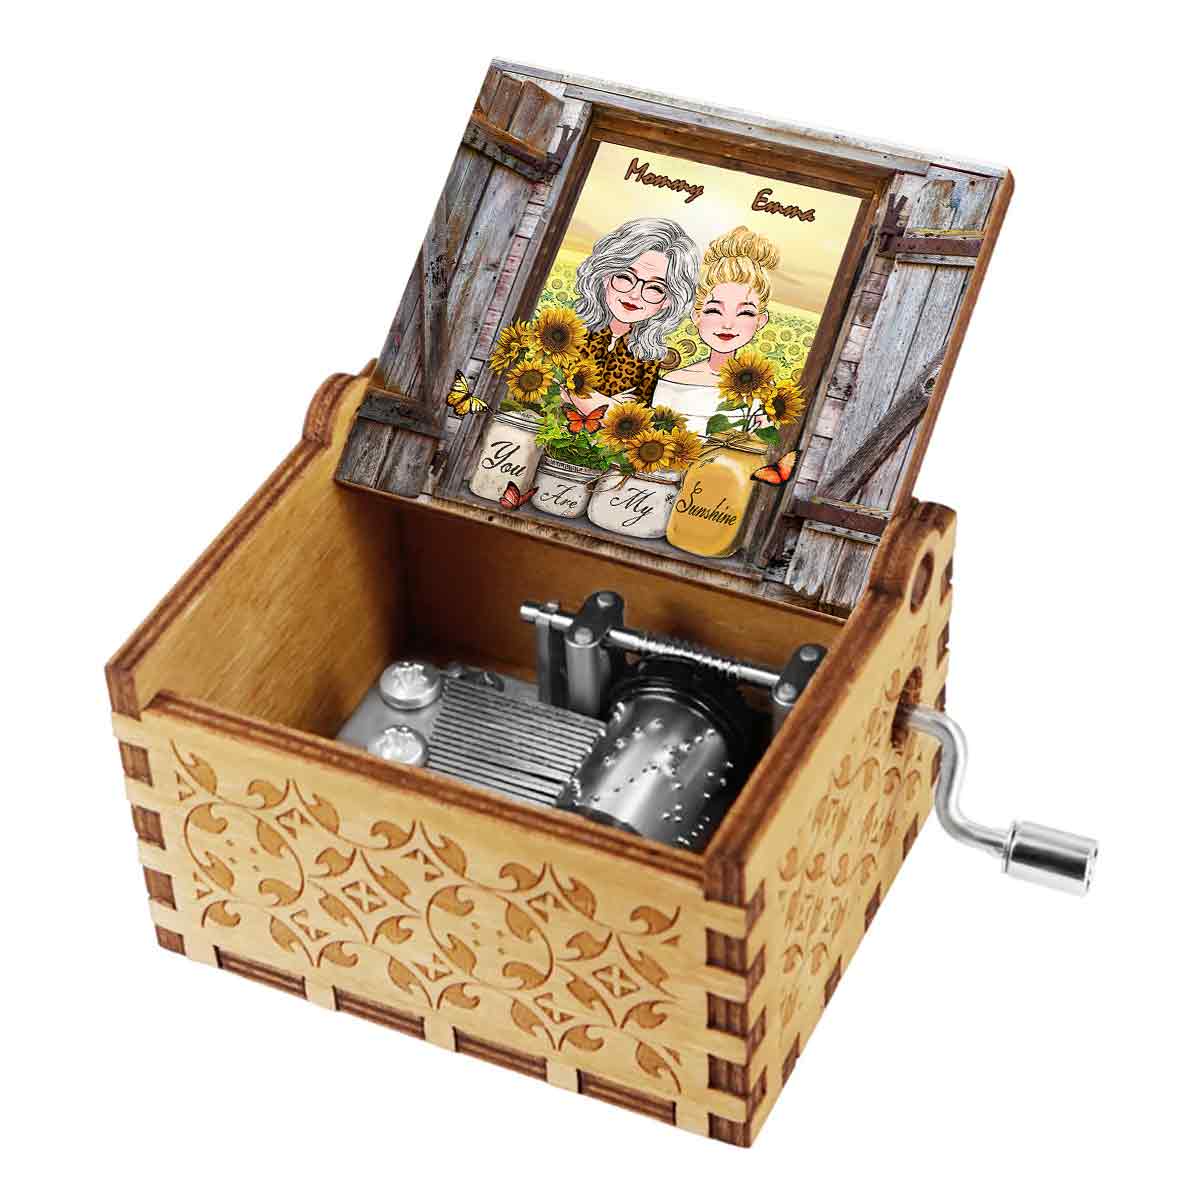 You're My Sunshine - Personalized Mother Hand Crank Music Box